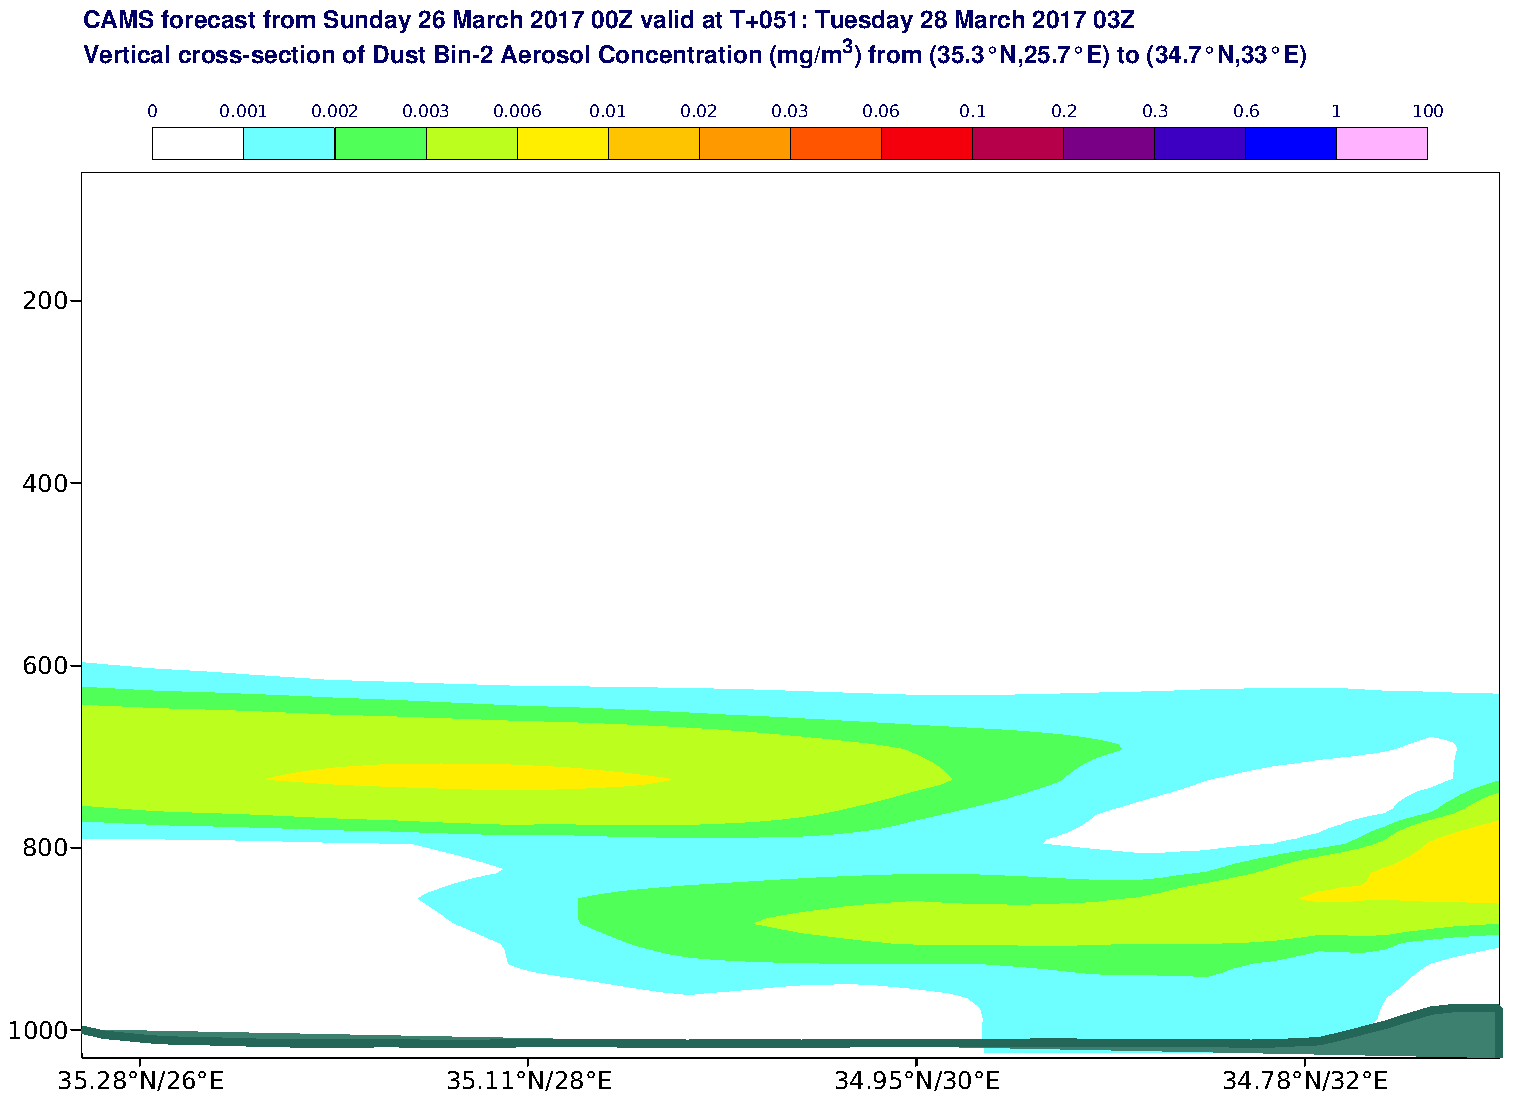 Vertical cross-section of Dust Bin-2 Aerosol Concentration (mg/m3) valid at T51 - 2017-03-28 03:00